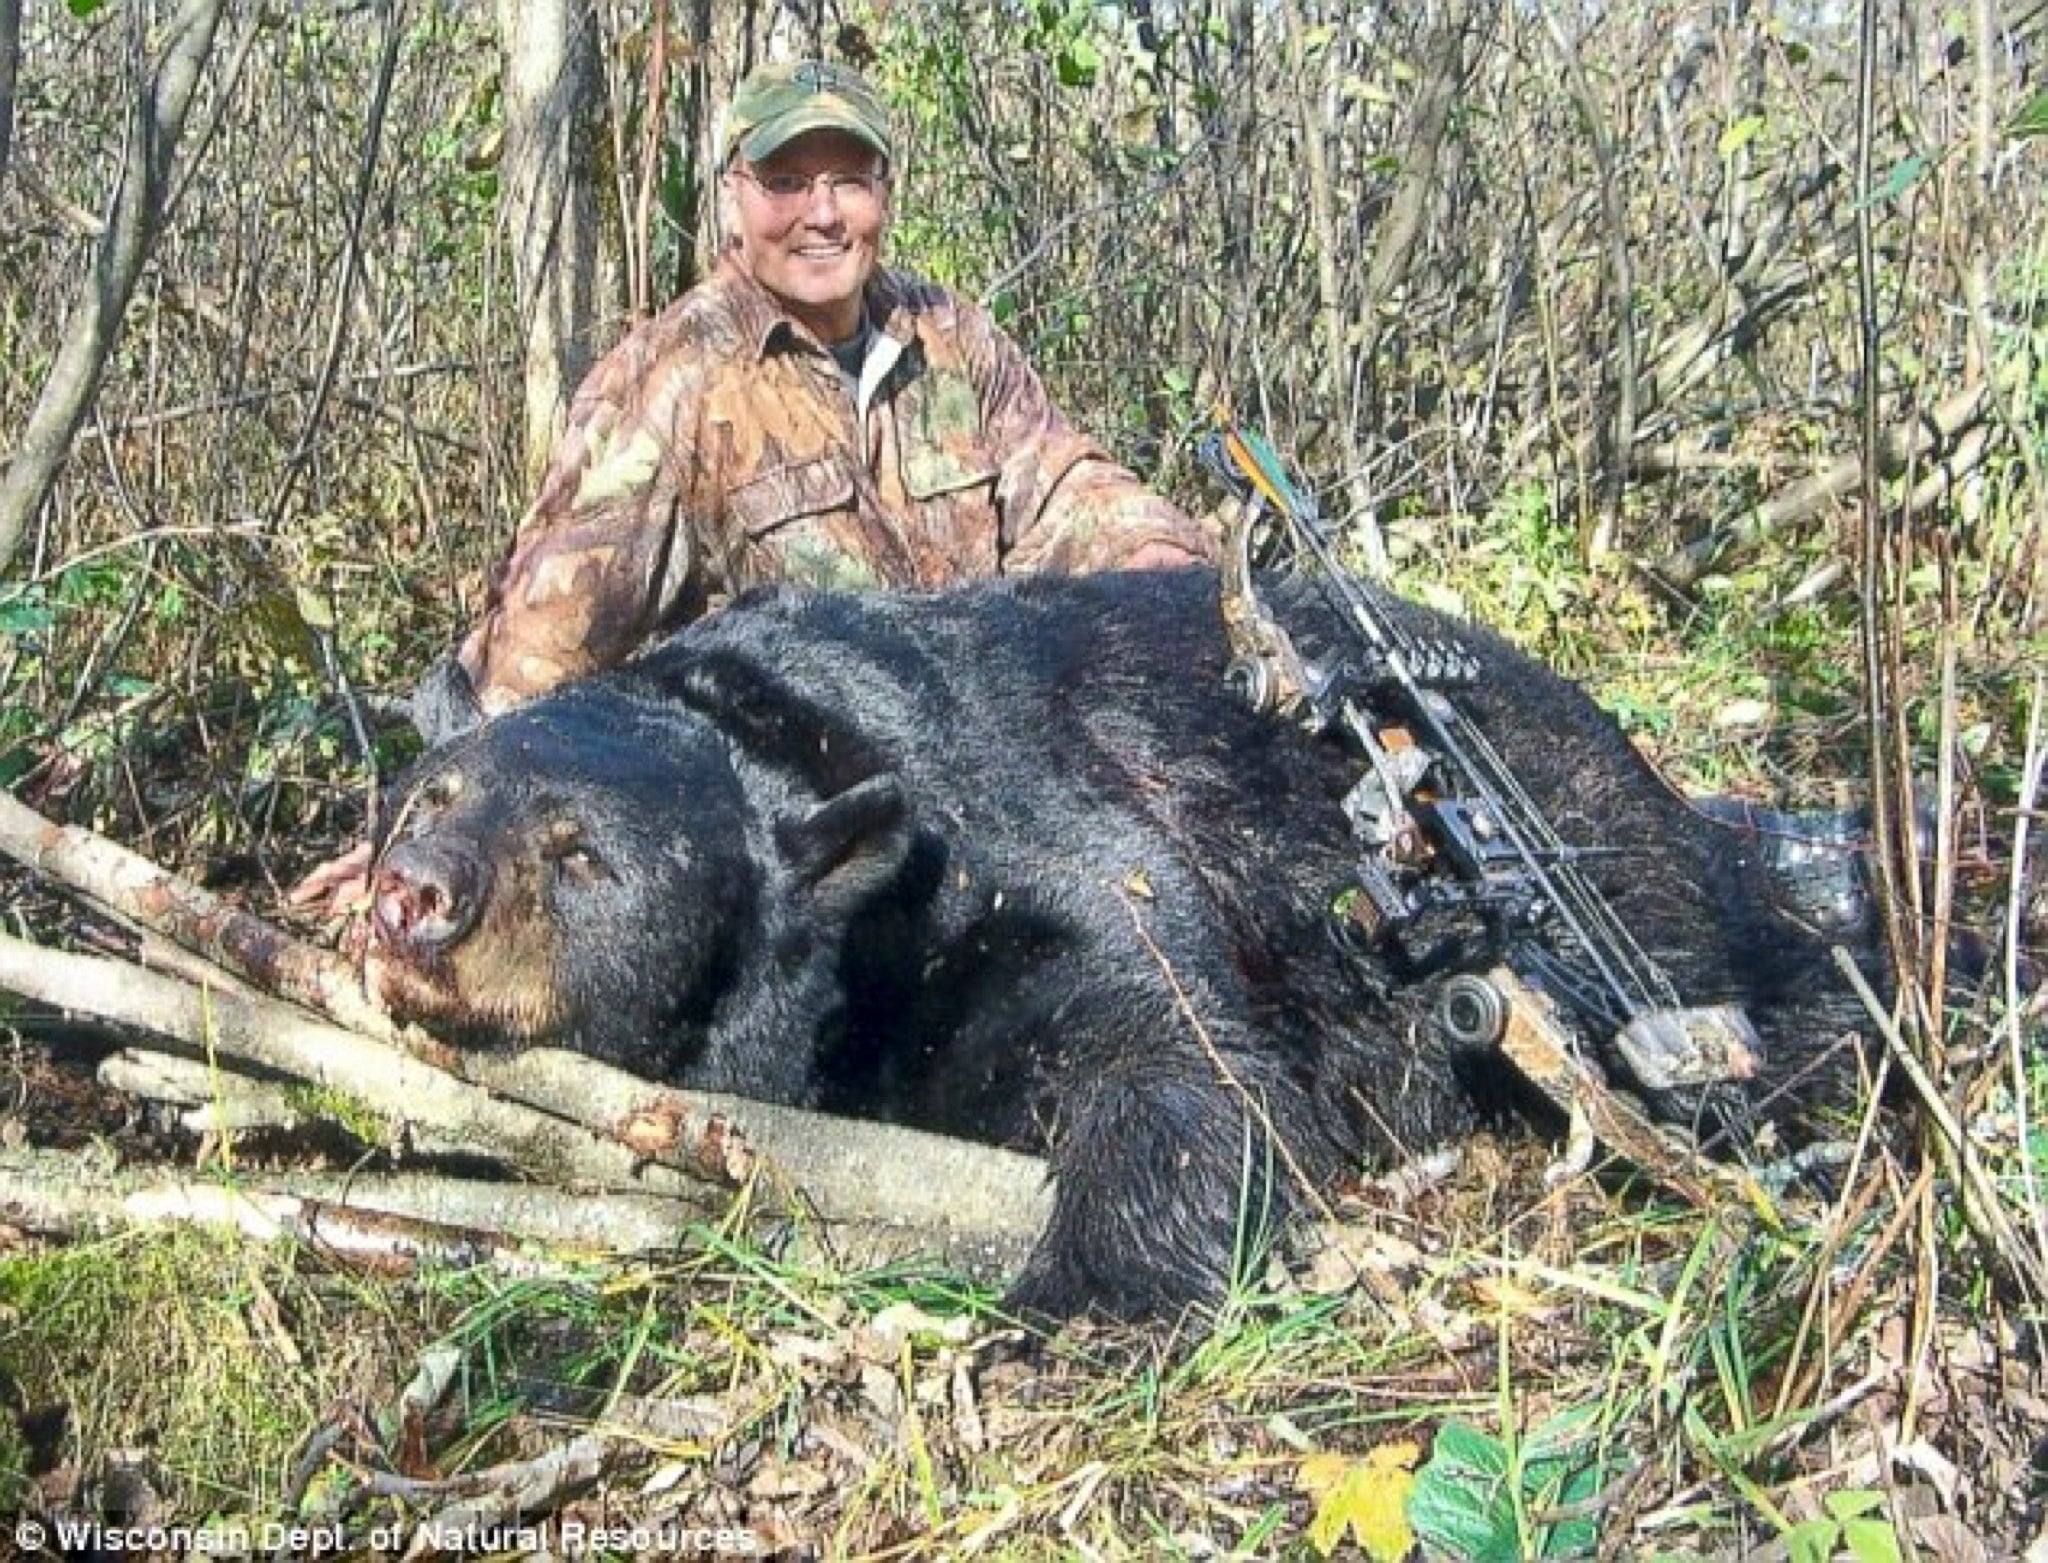 Walter Palmer with a black bear he killed in 2006